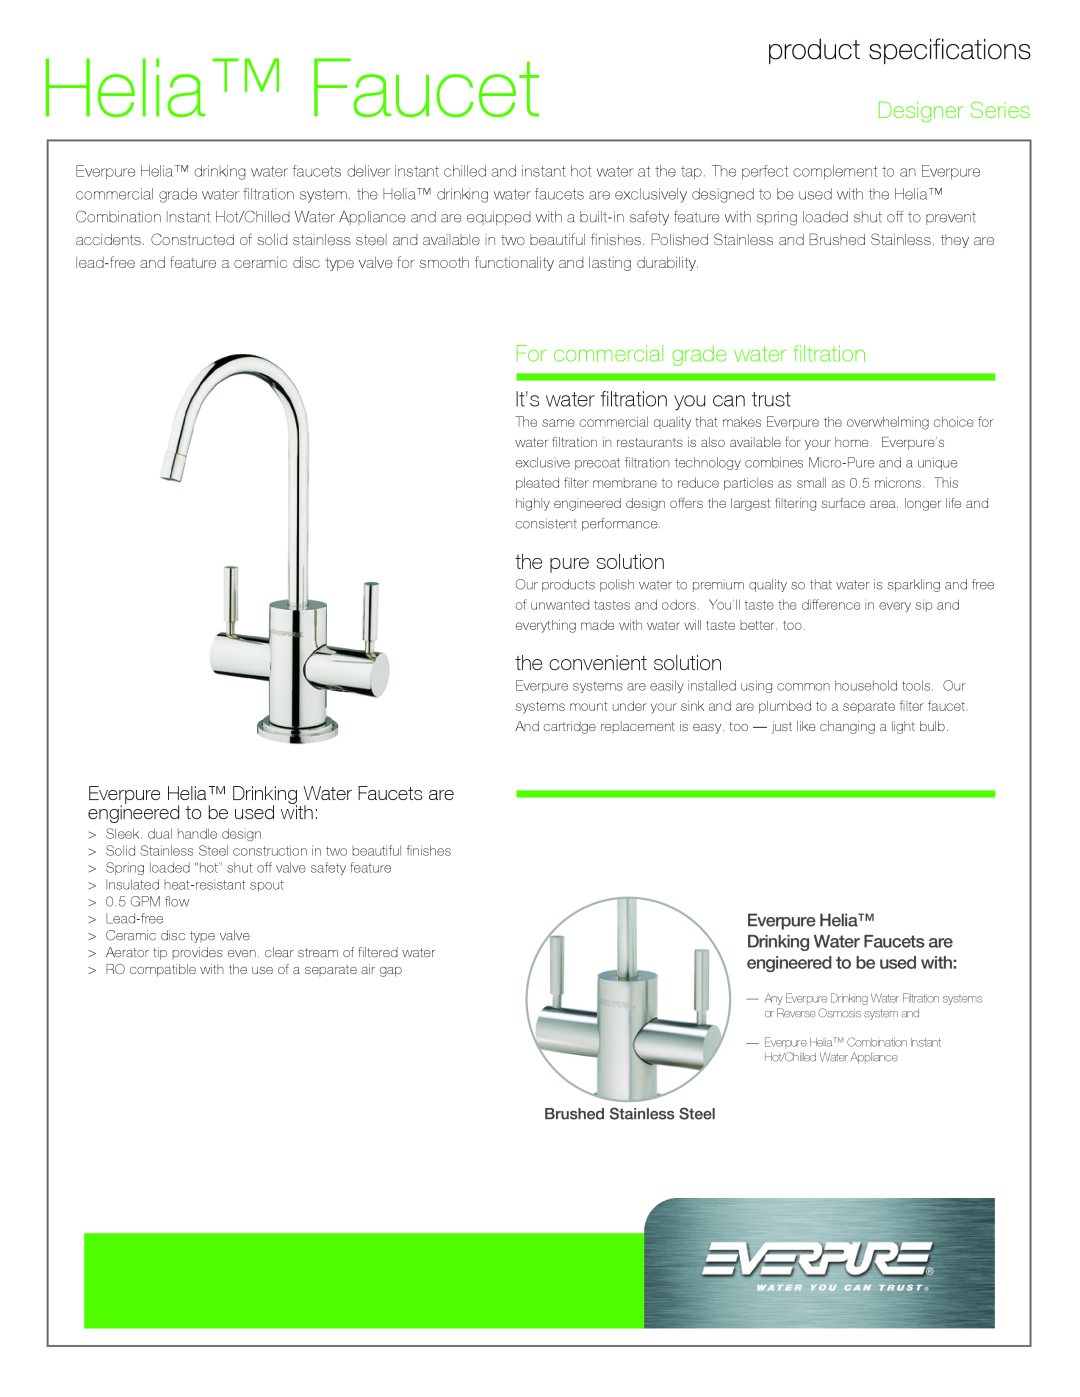 Everpure EV9000-87 manual Helia Faucet, Designer Series, For commercial grade water filtration, the pure solution 